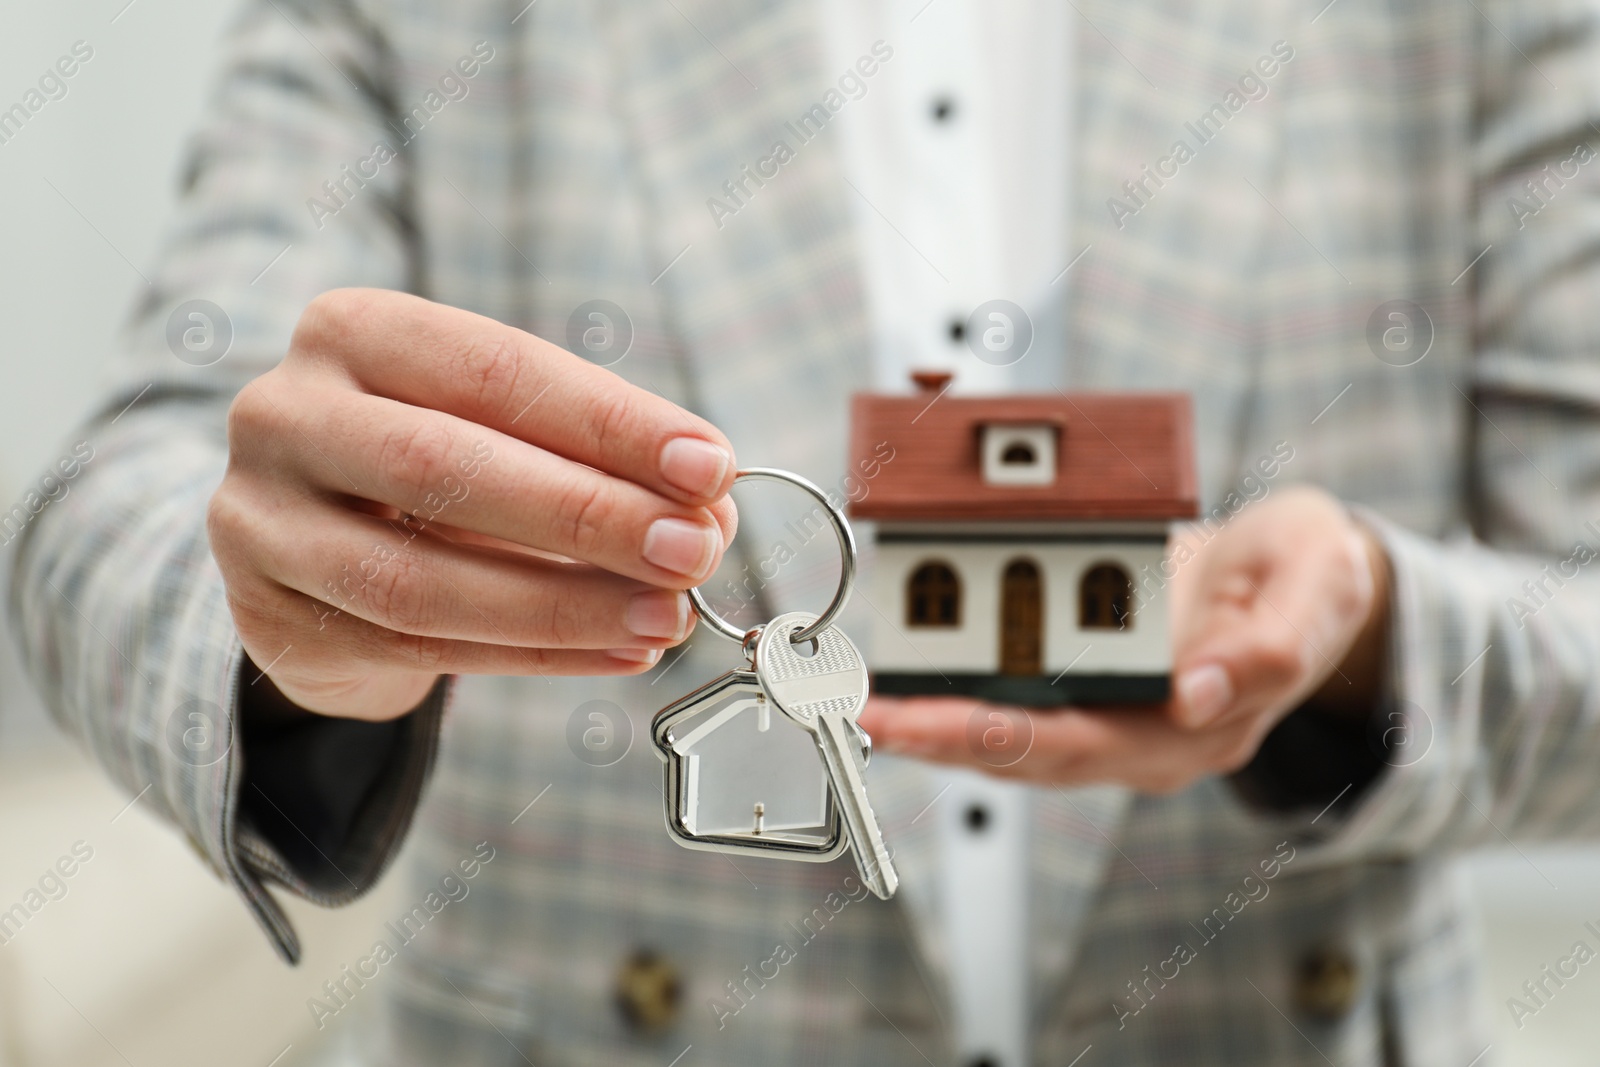 Photo of Real estate agent holding house model and key indoors, closeup